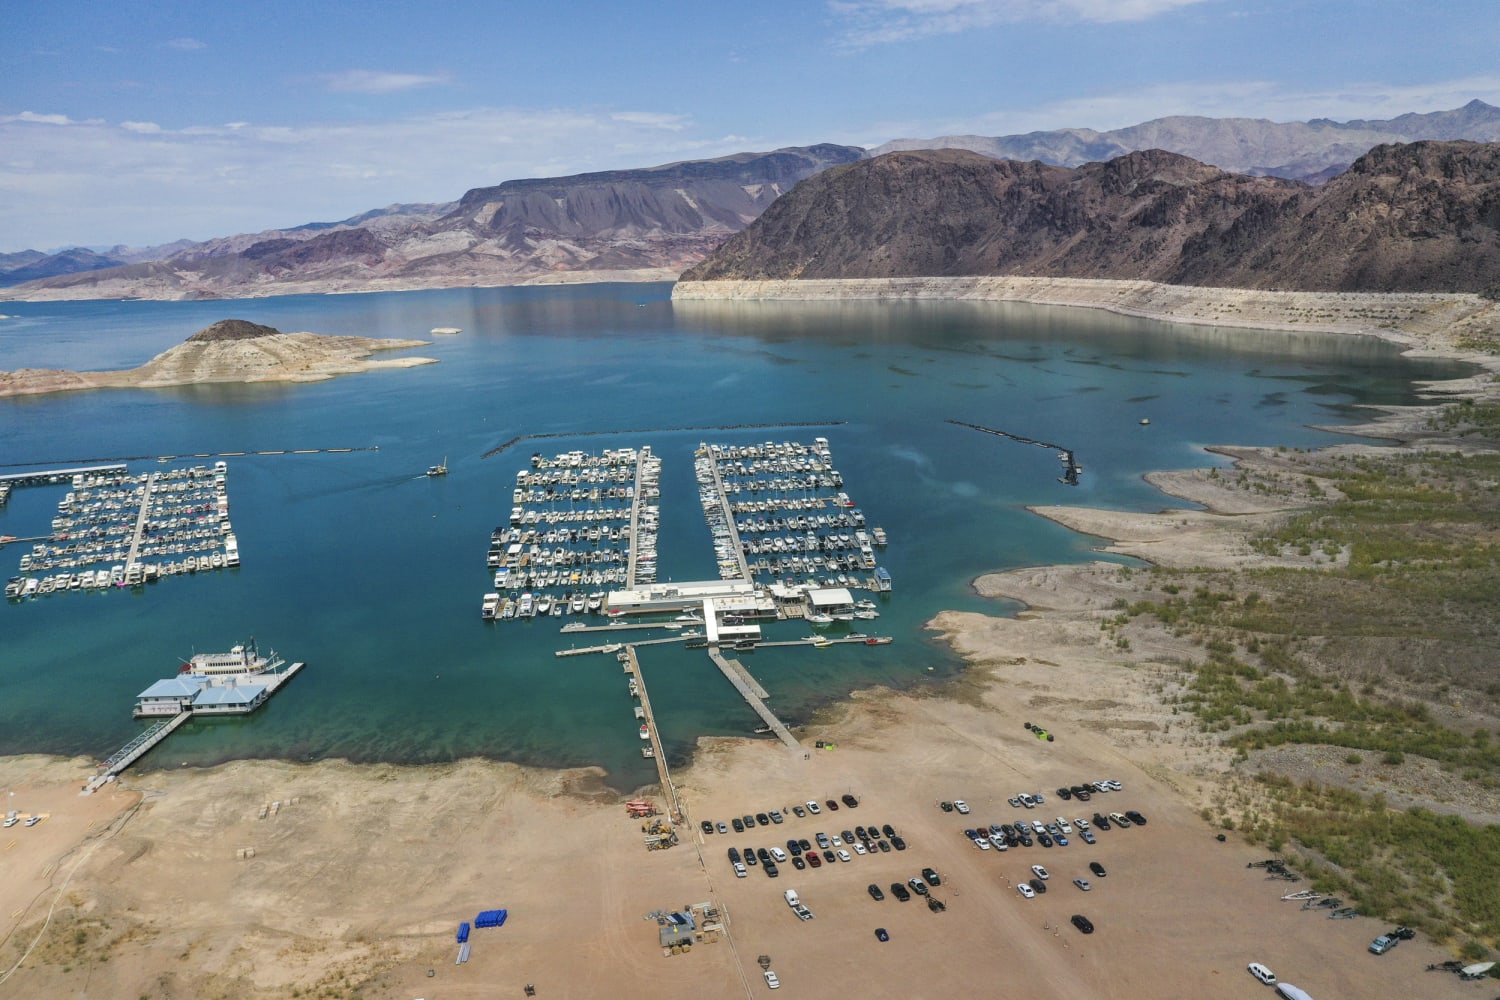 Water conservation plan looks to reverse Lake Mead’s historic decline